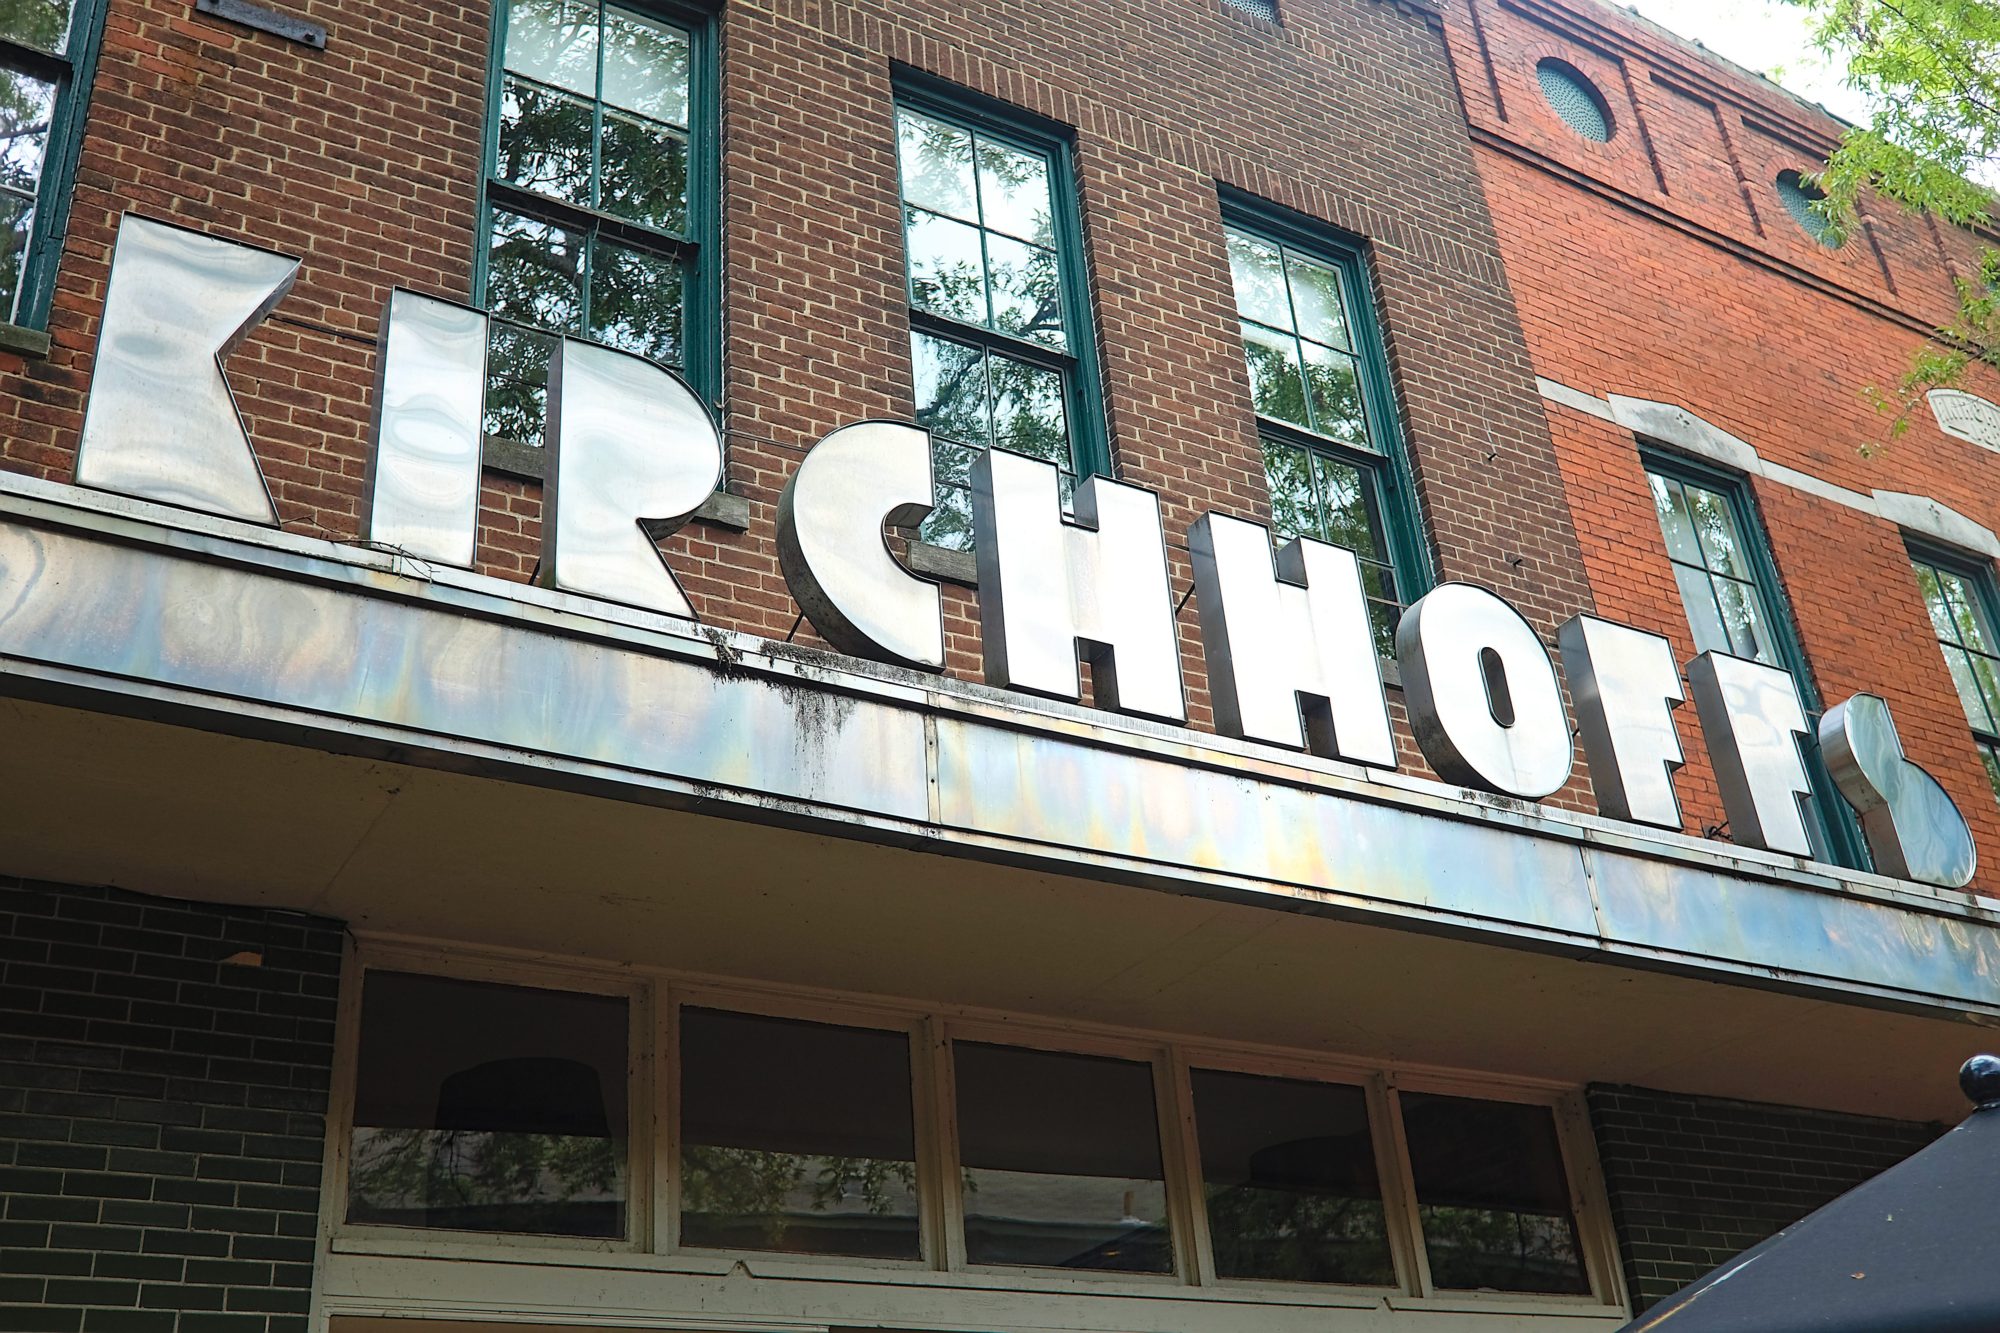 The sign for Kirchhoff's in Paducah